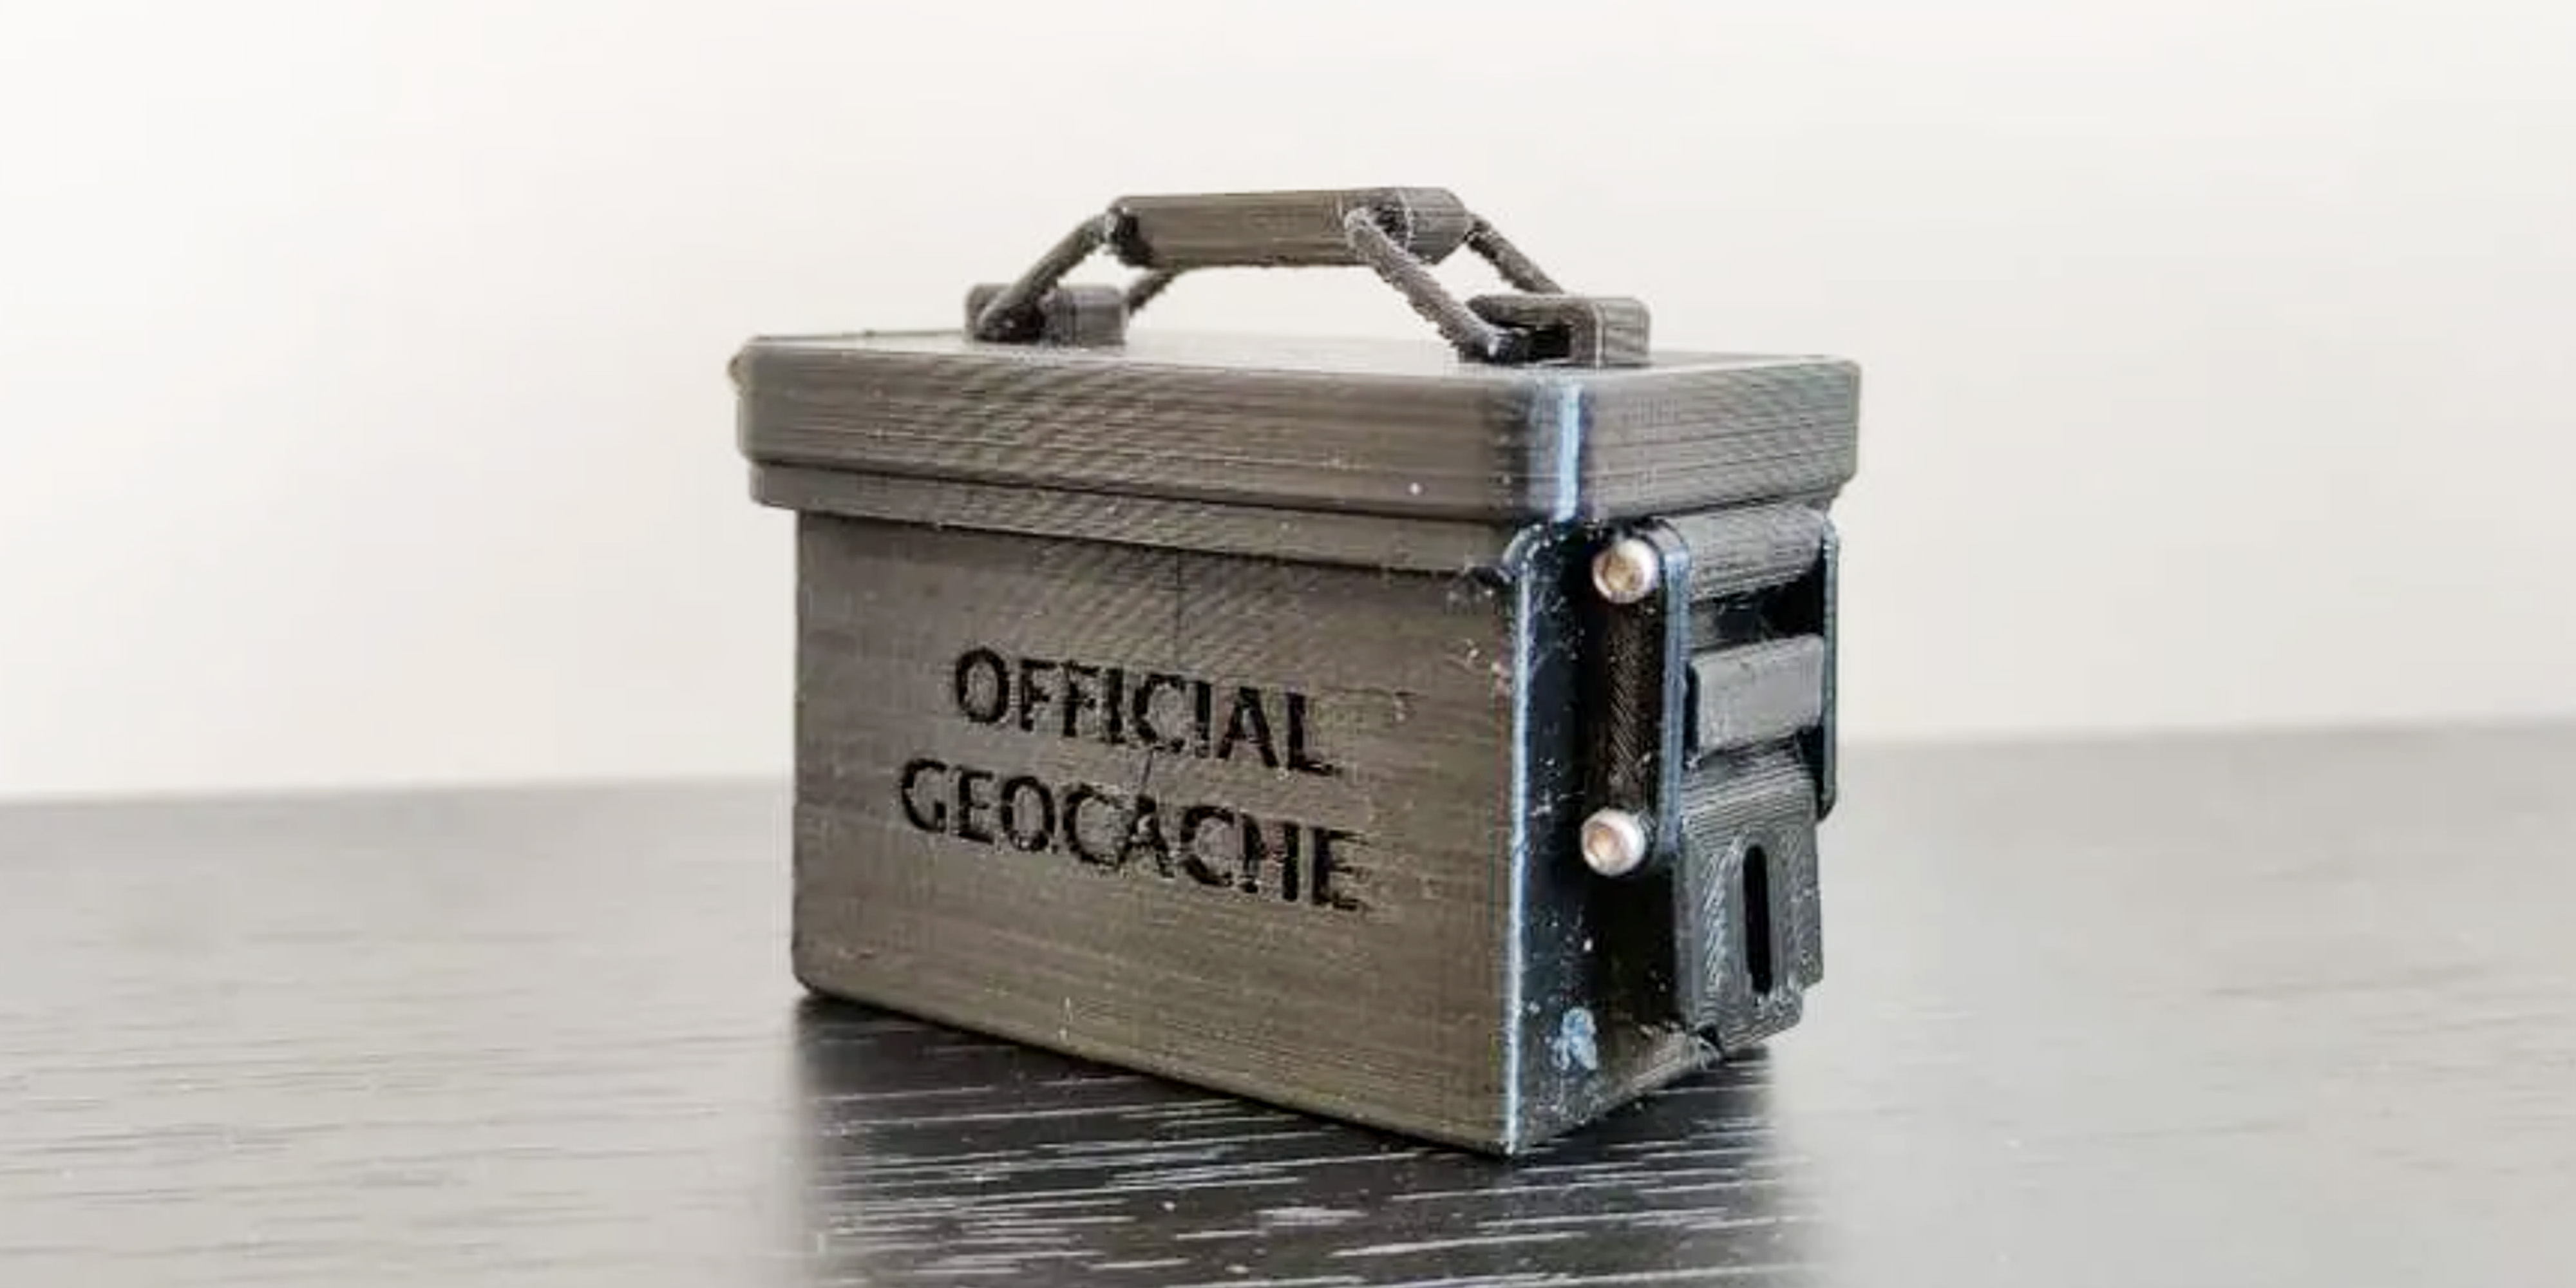 Find here a selection of the best 3D models of creations related to geocaching 3D printable